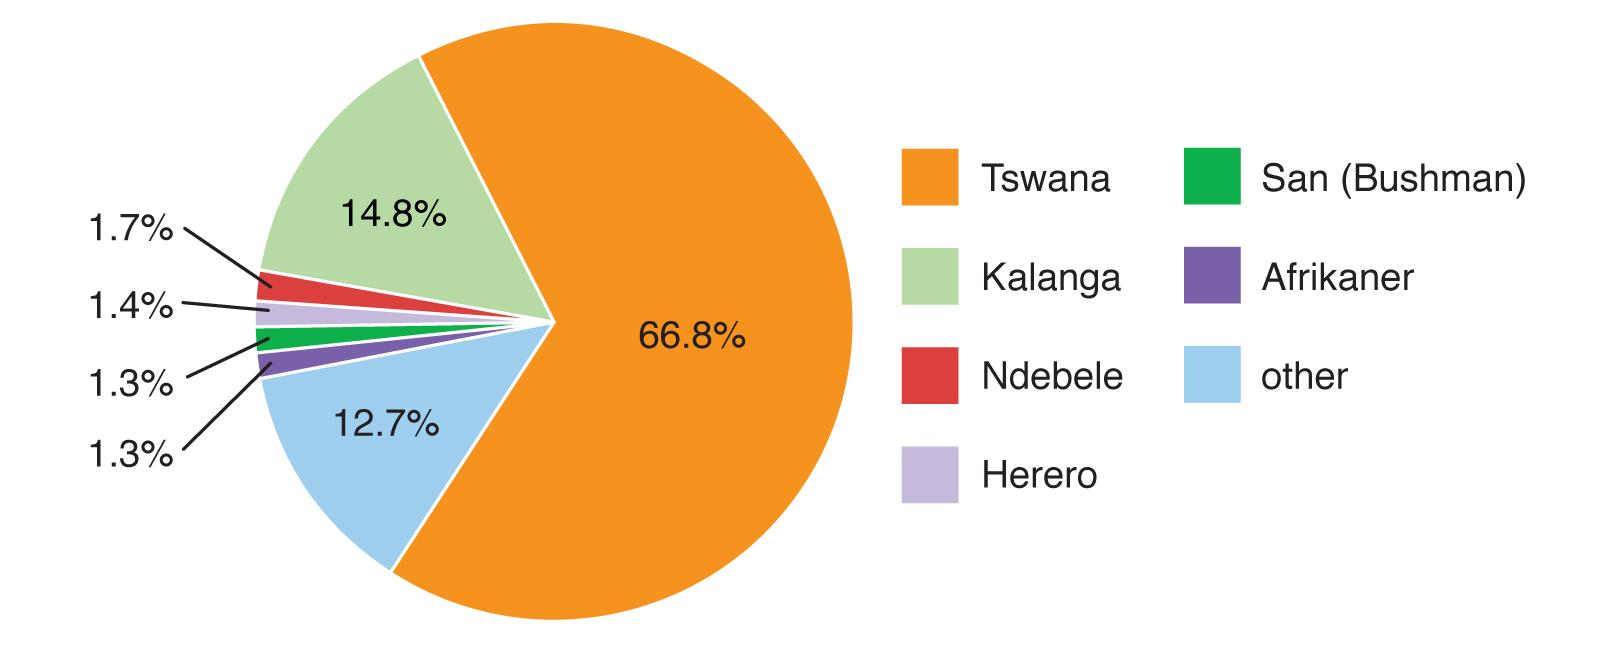 Botswana has a language made up of five primary click sounds